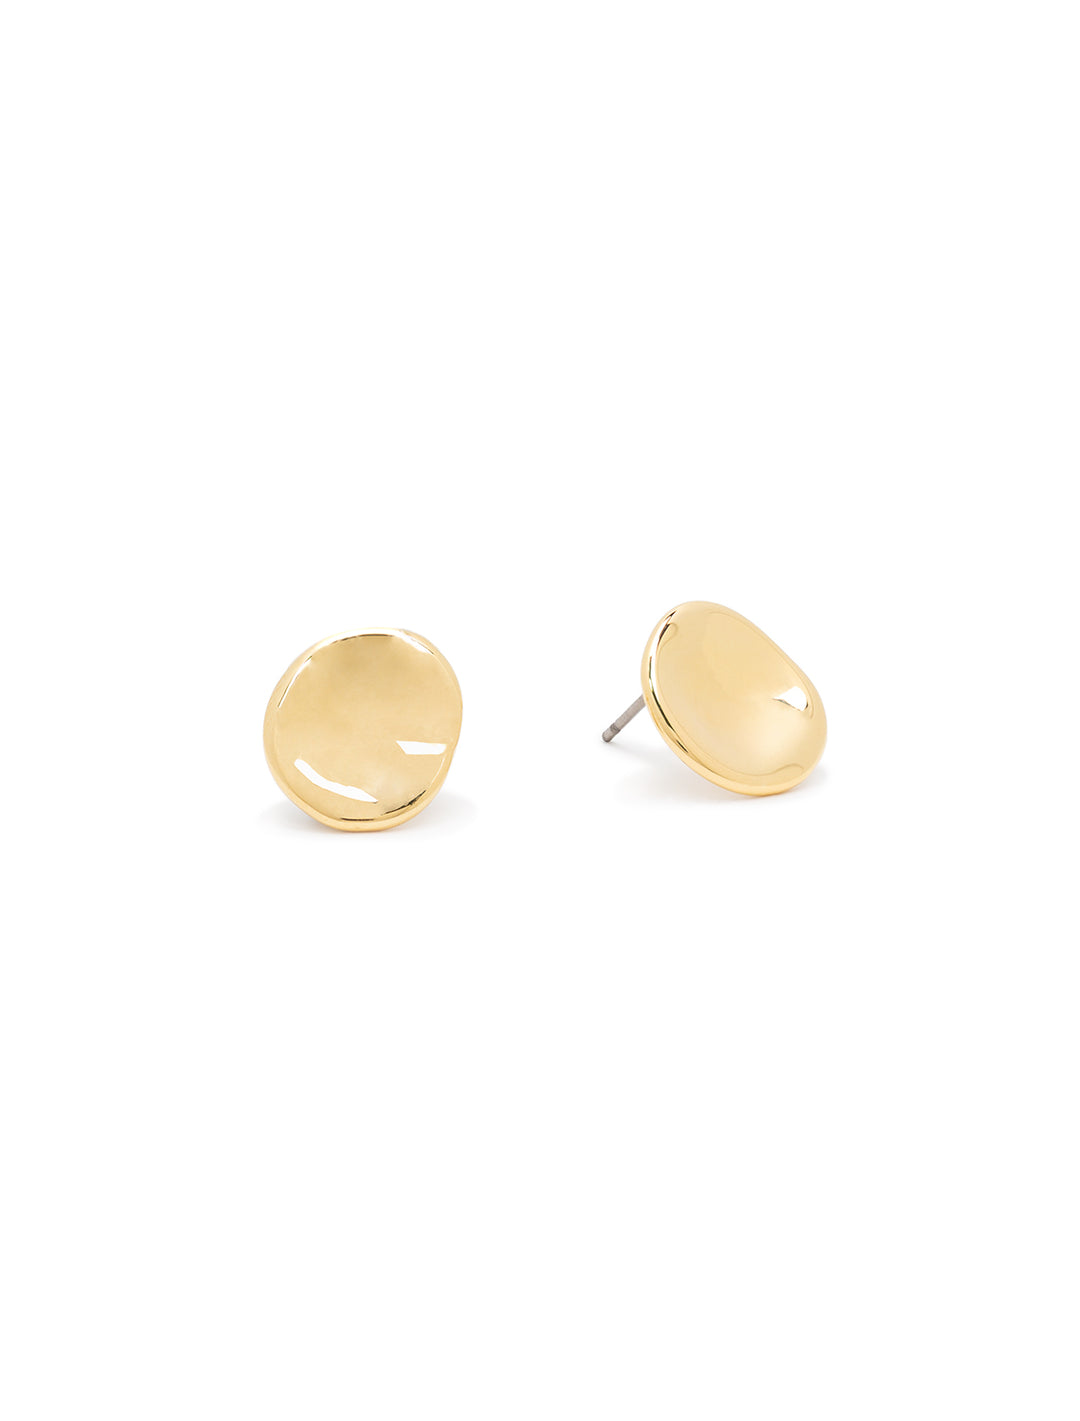 Front view of concave gold button earrings